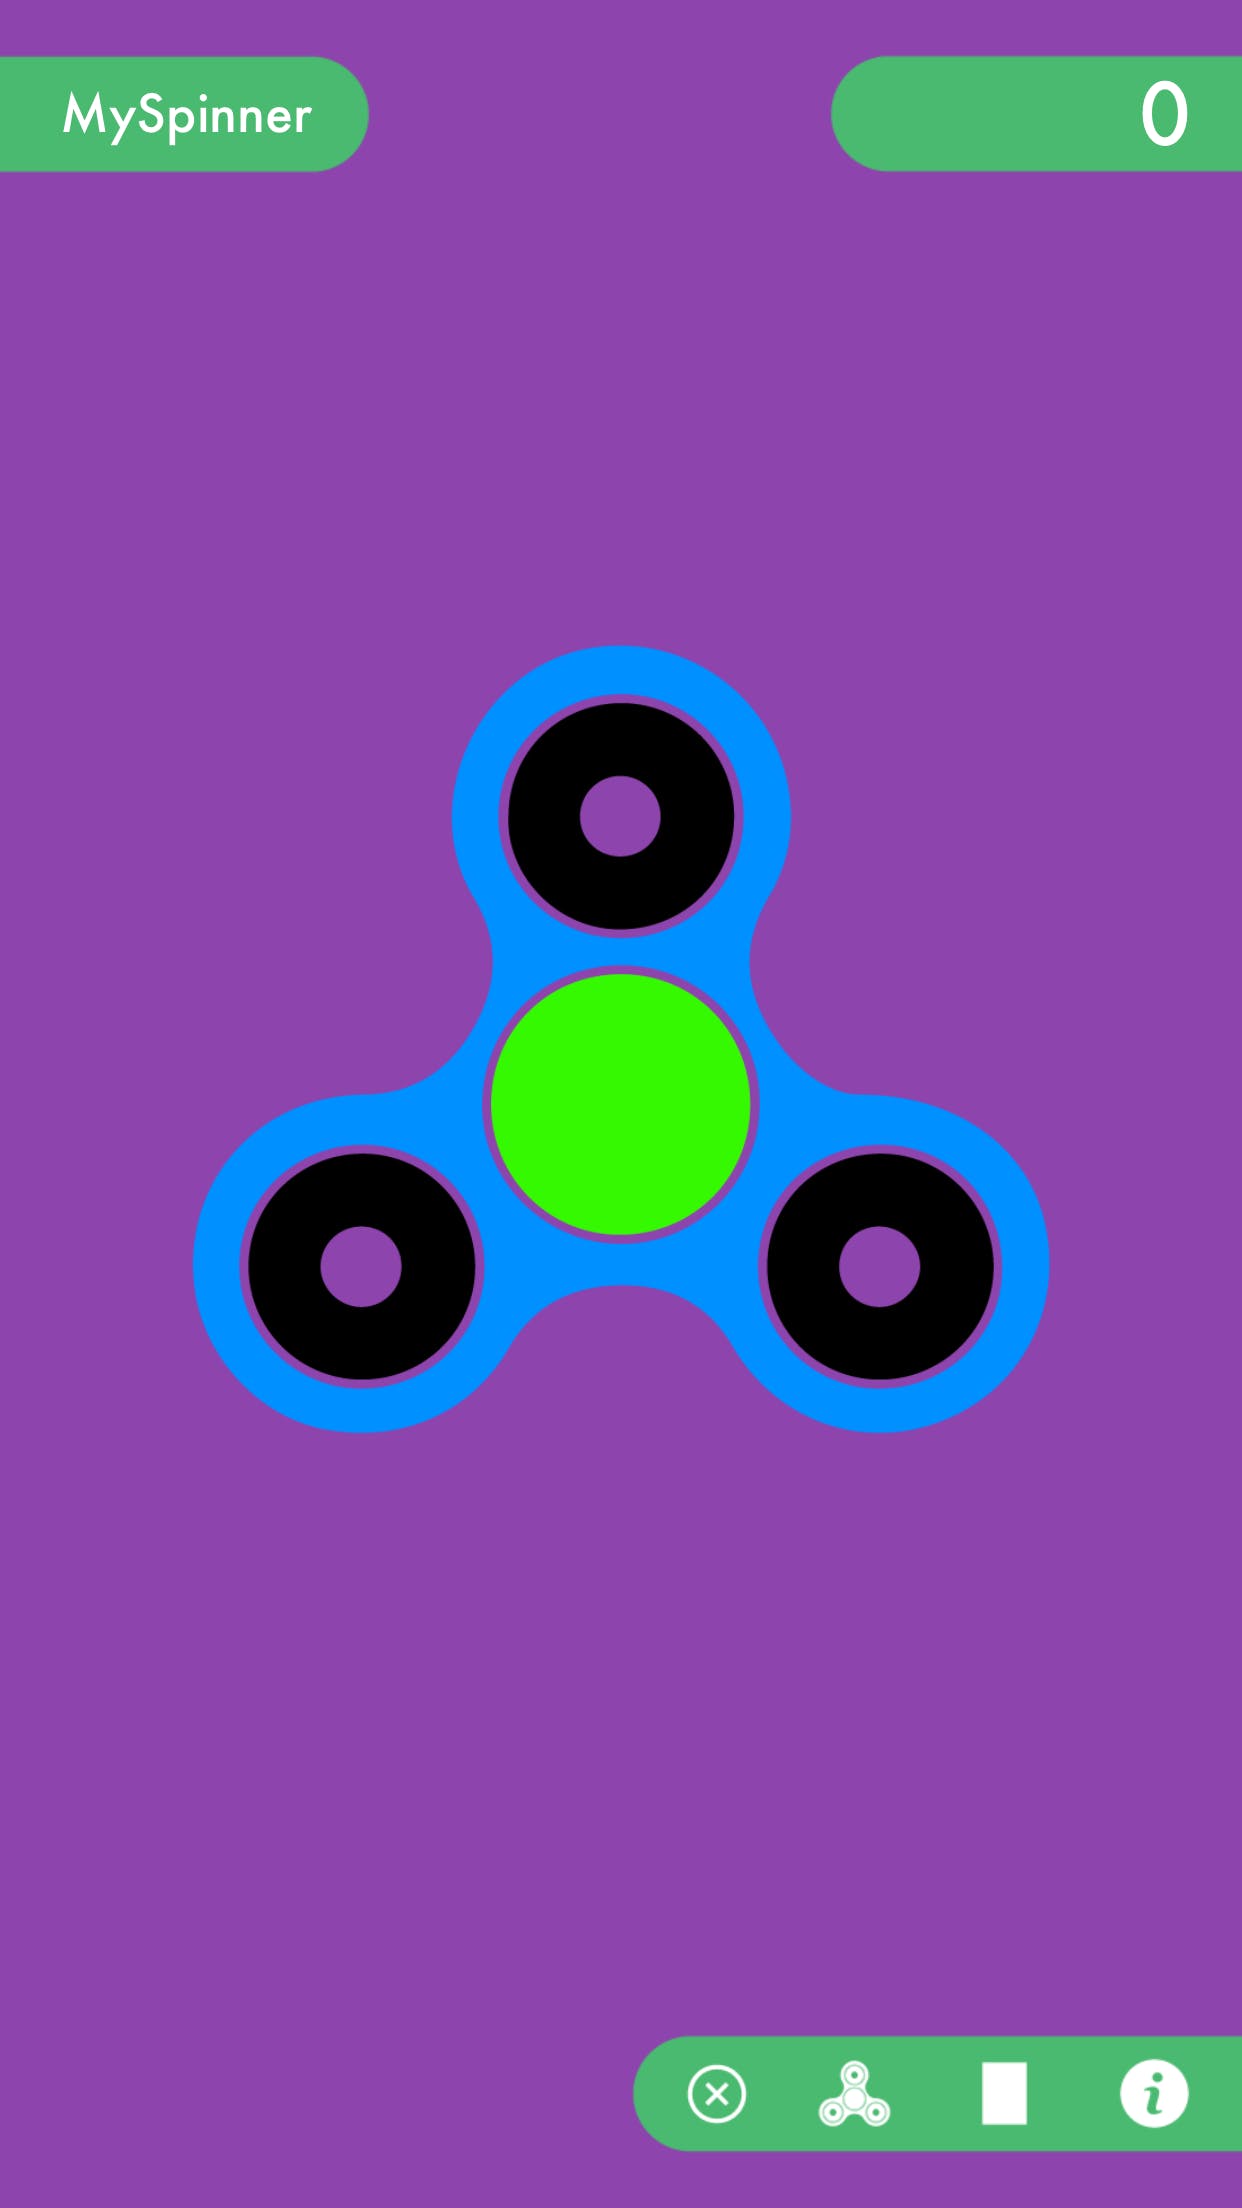 MySpinner - Controlled by phone's accelerometer media 3